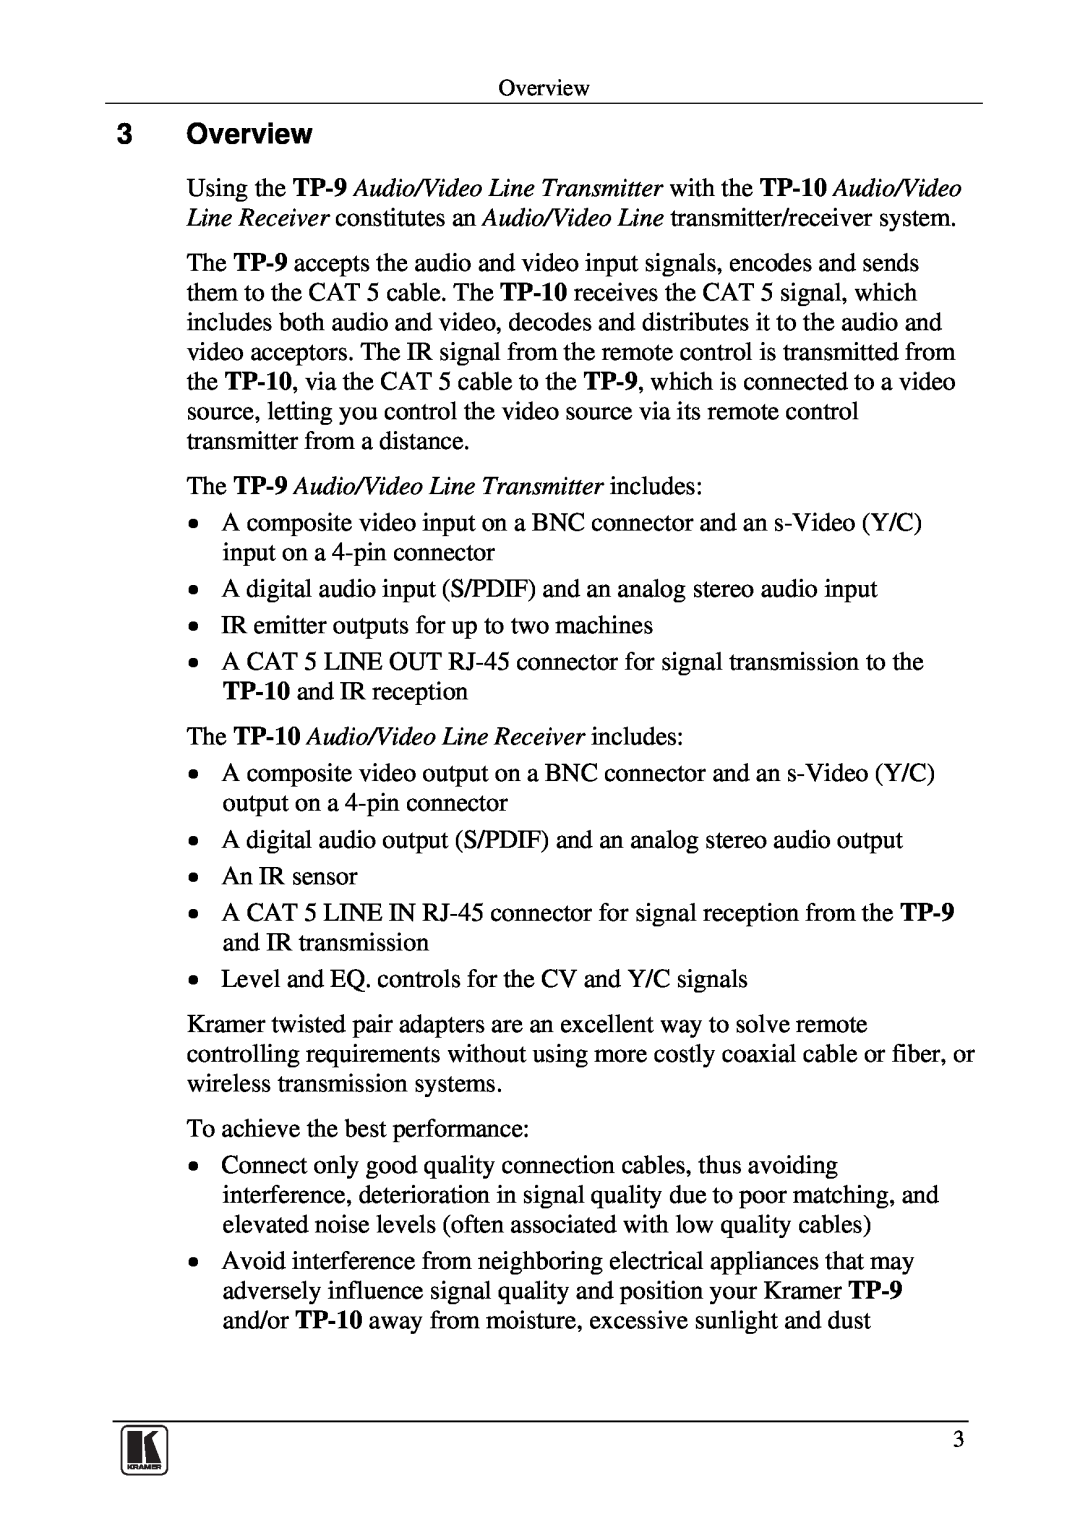 Kramer Electronics user manual Overview, The TP-9 Audio/Video Line Transmitter includes 